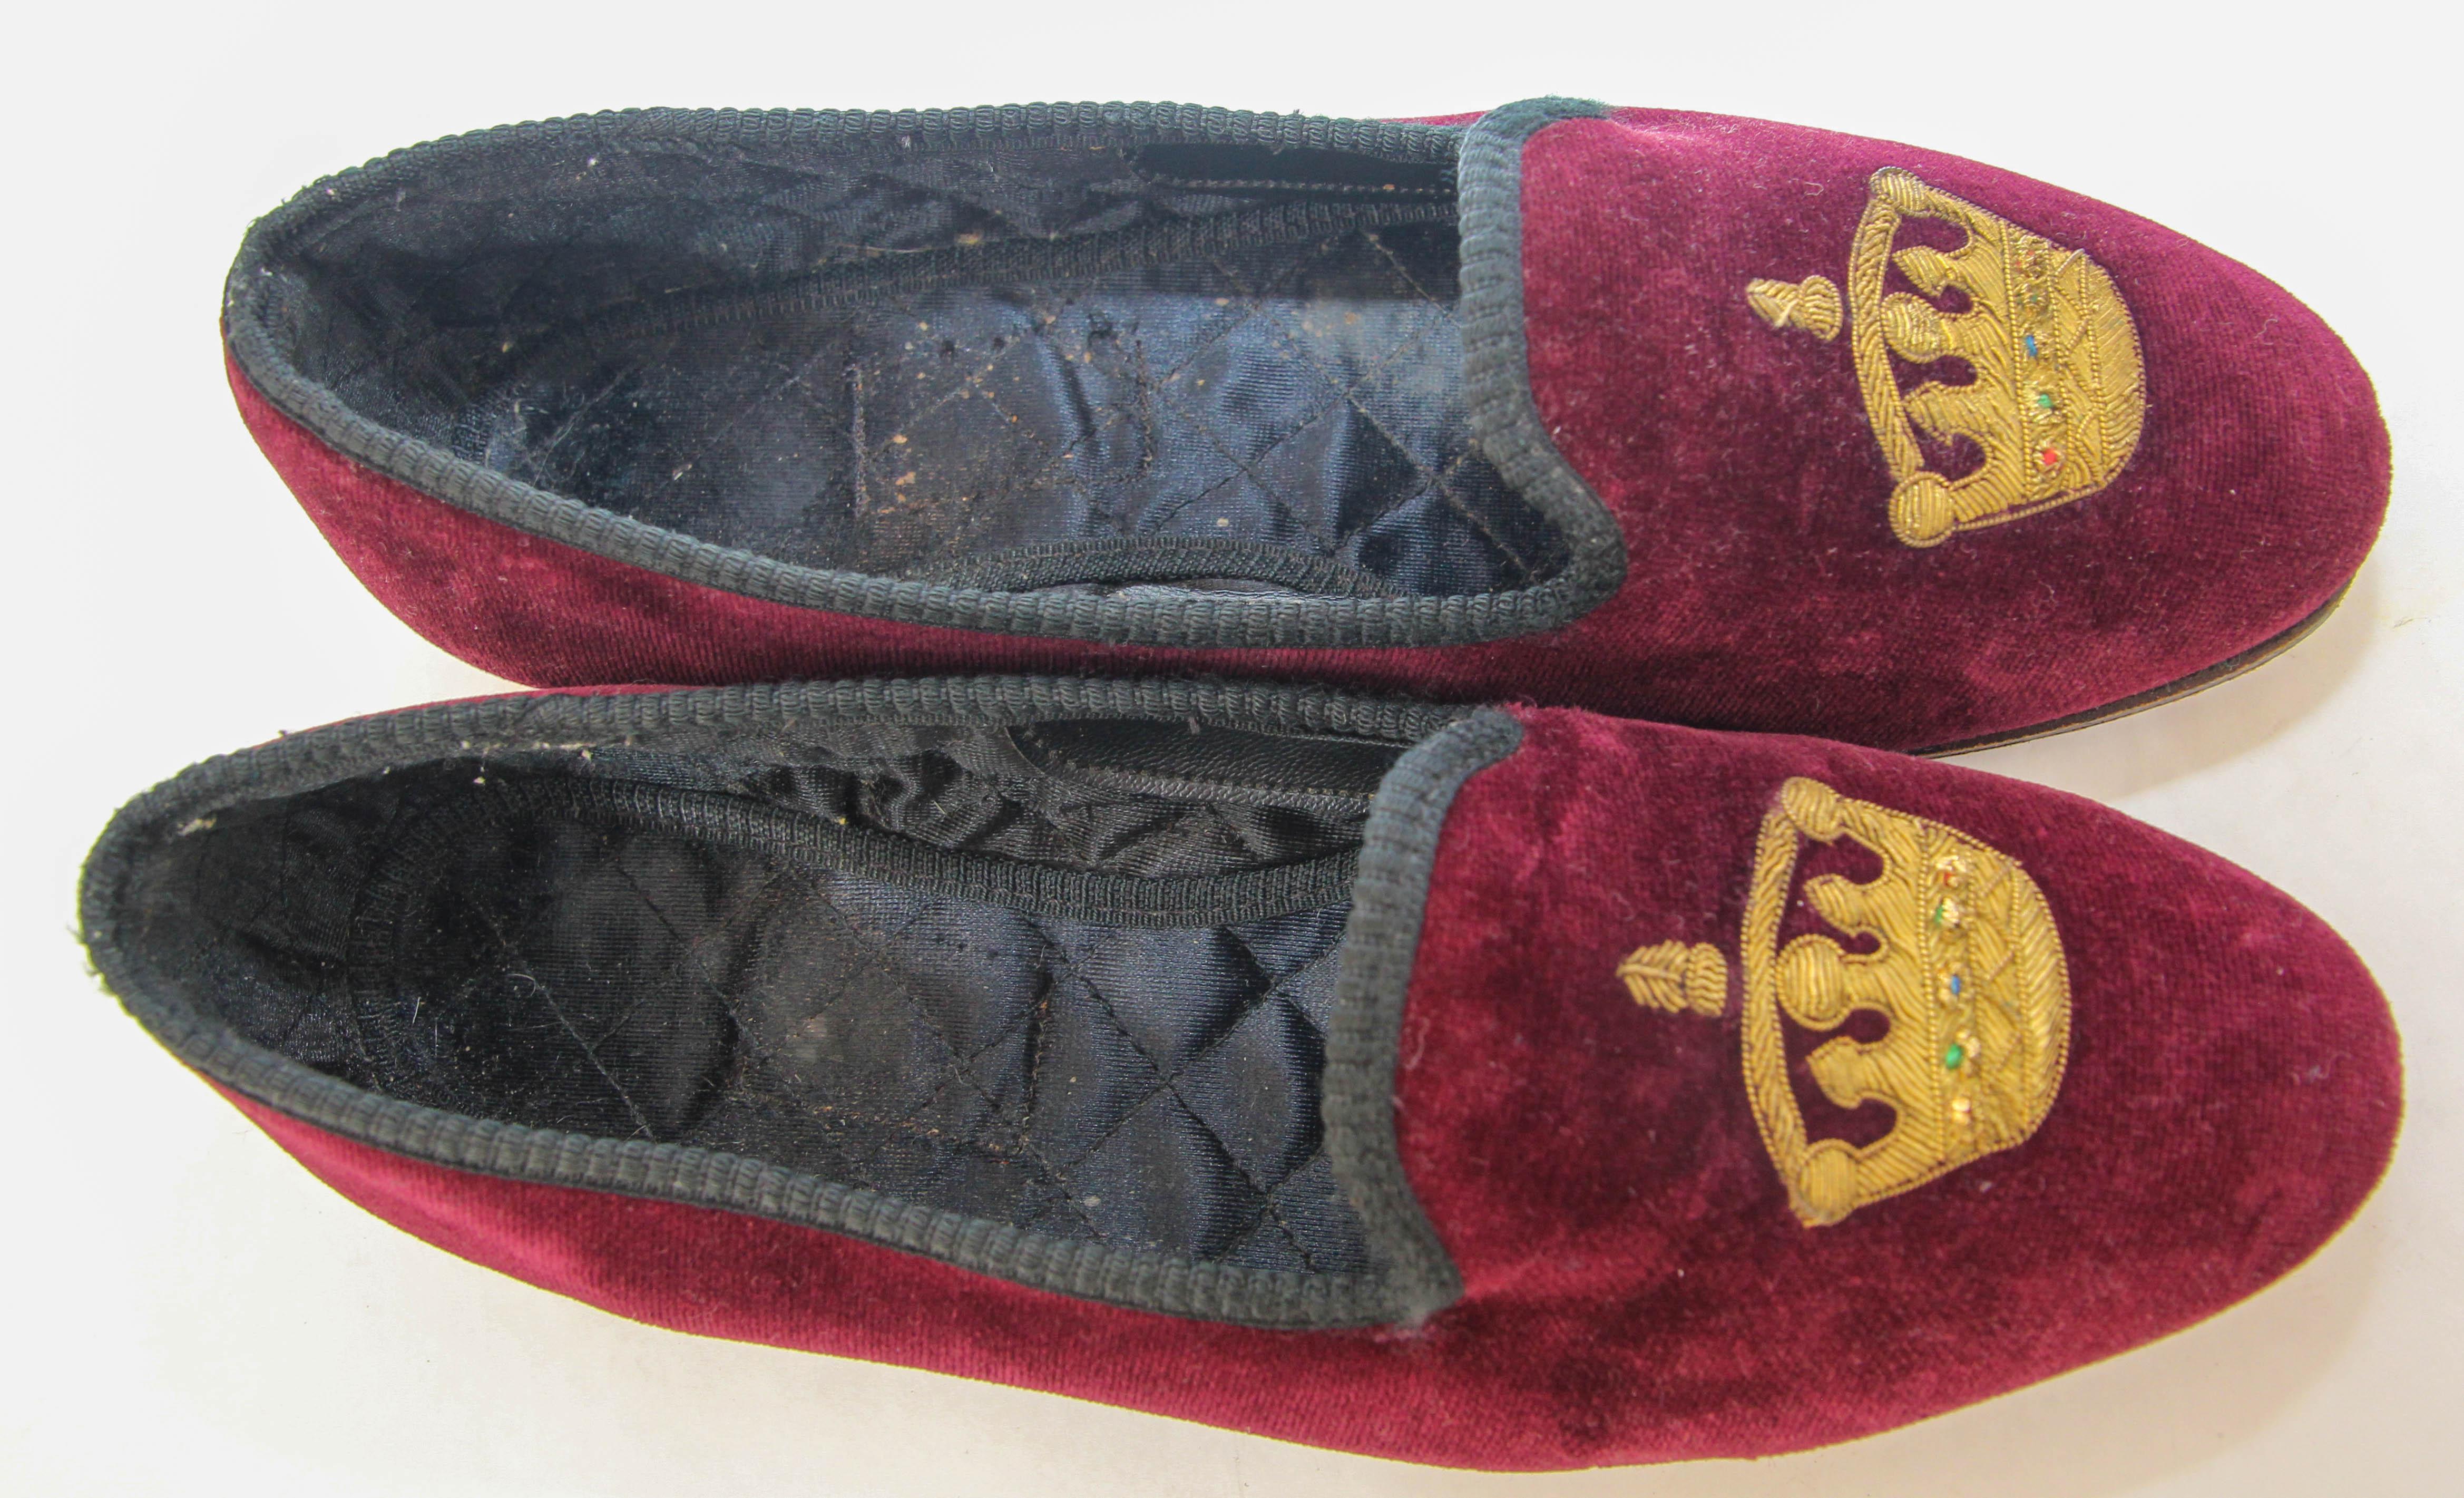 British Crown Embroidery Velvet Burgundy Loafers Slip On Size 6.5 For Sale 6